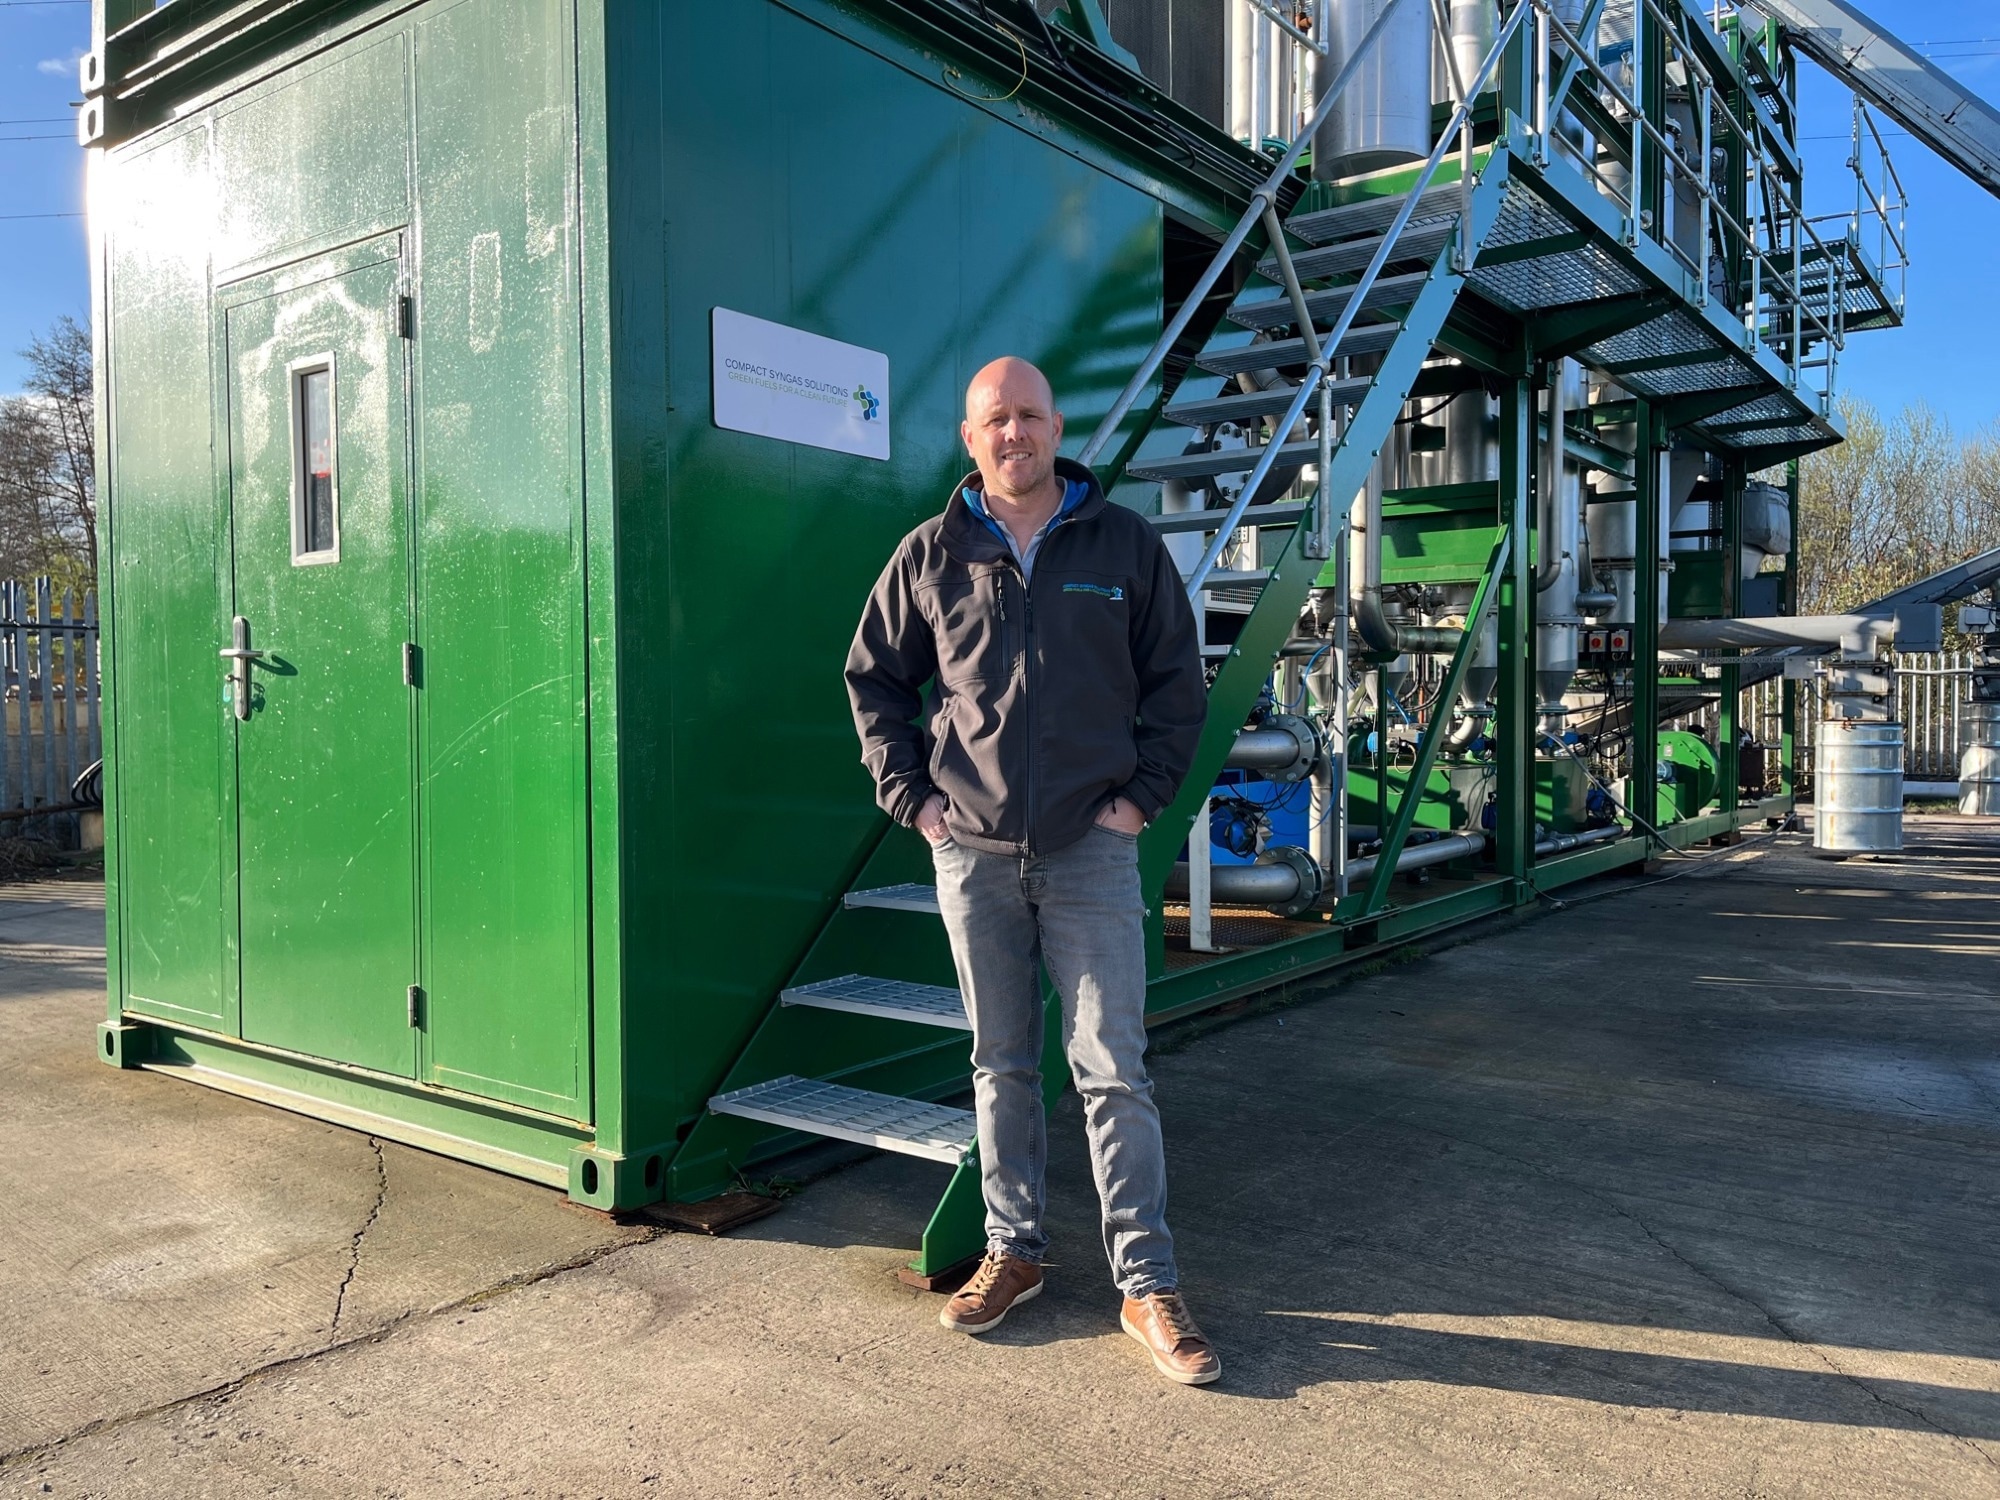 Producer of Green Fuel from Waste Wins £4m Funding to Capture CO2 from Process